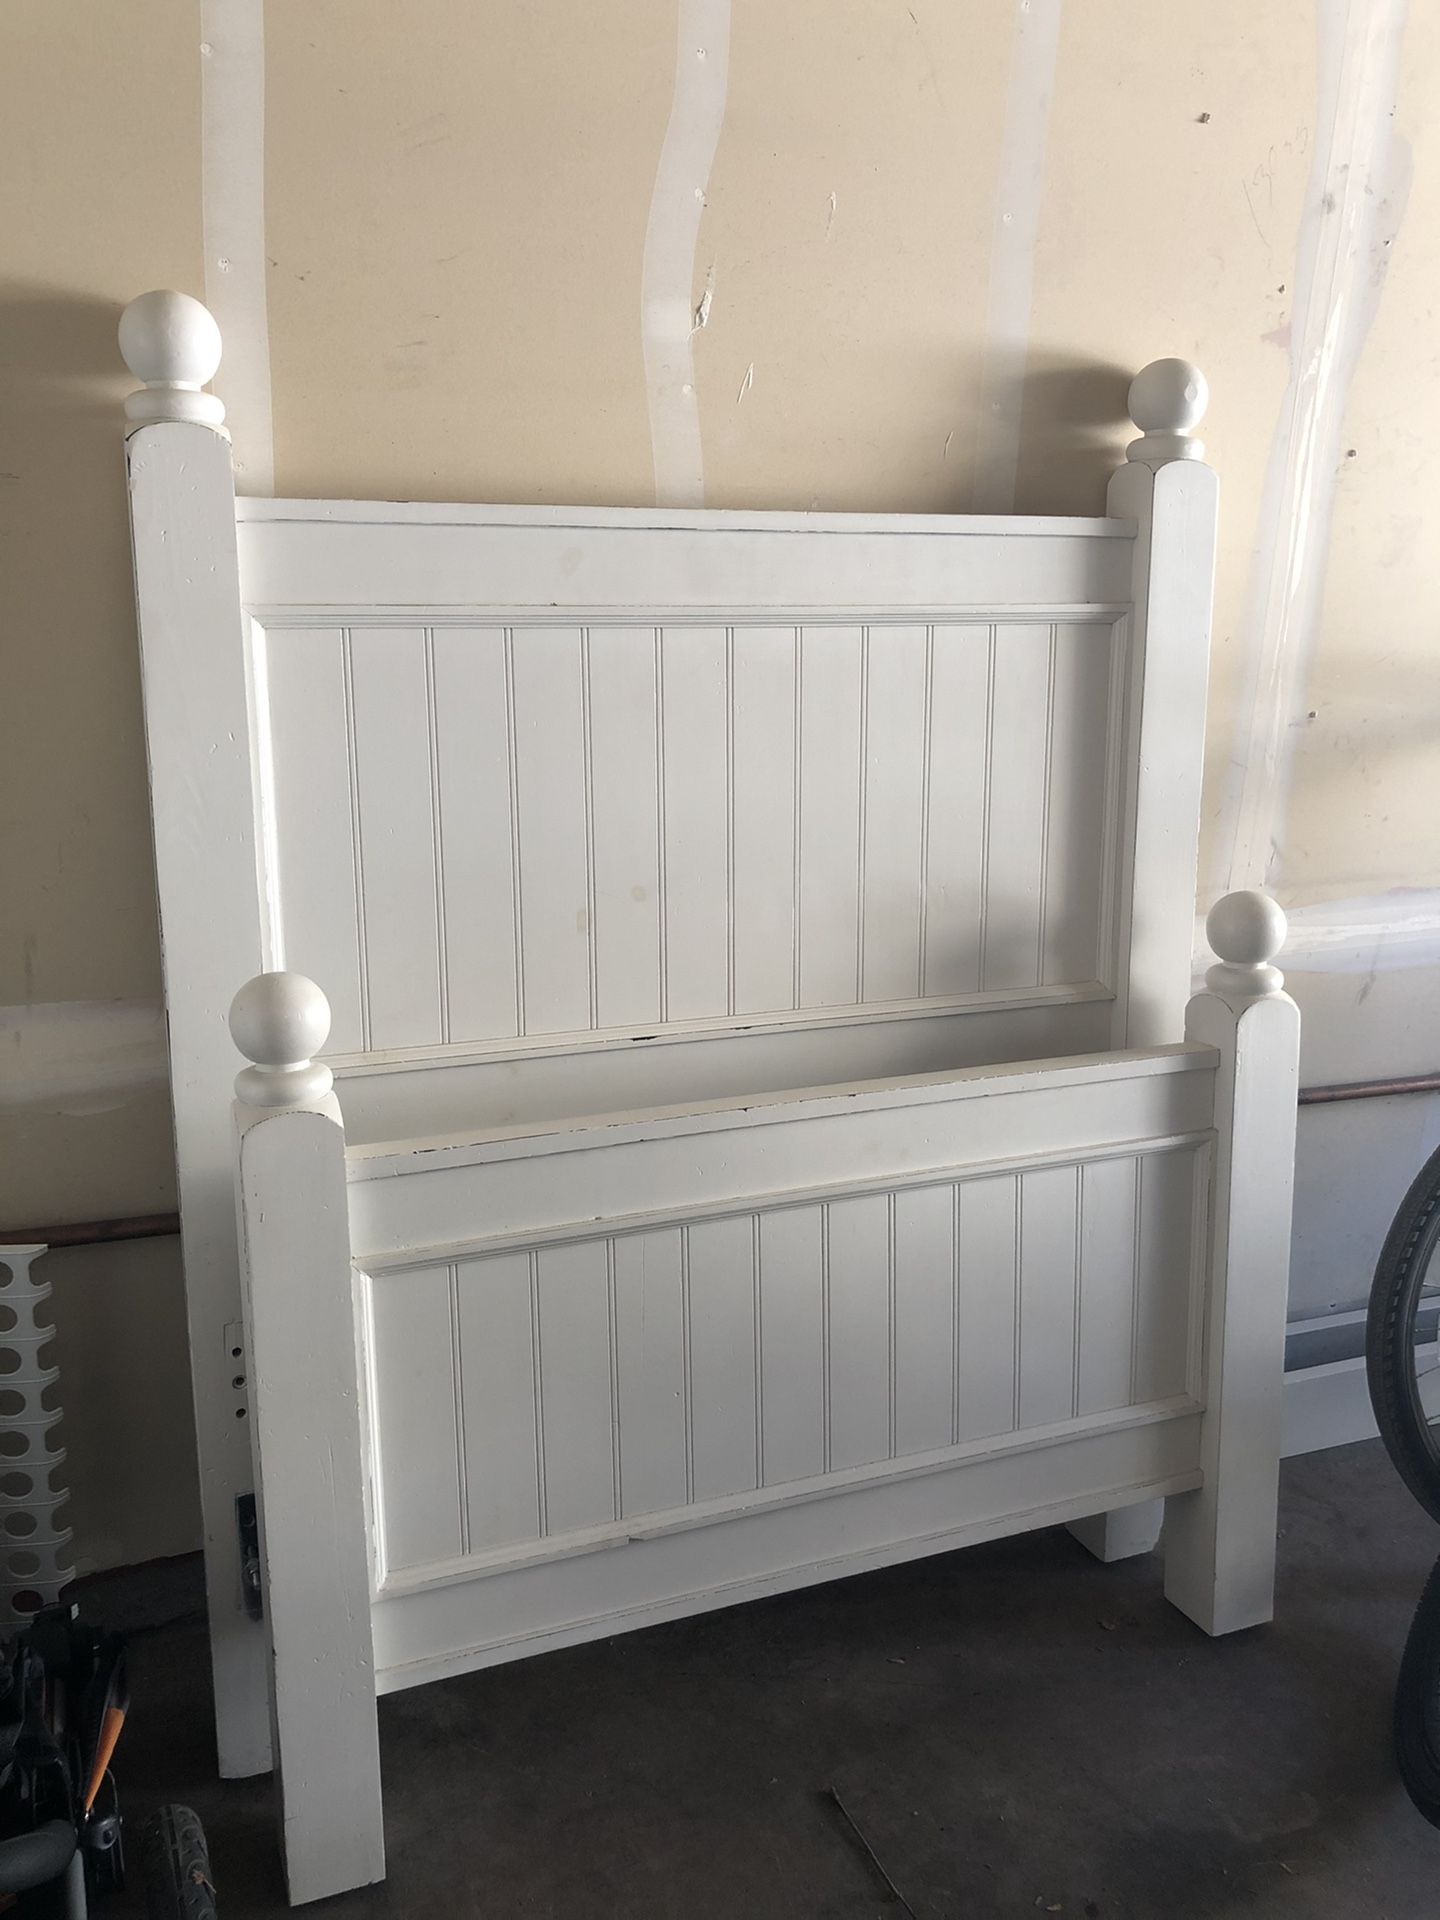 Pottery Barn wood twin bed frame (willing to trade!)